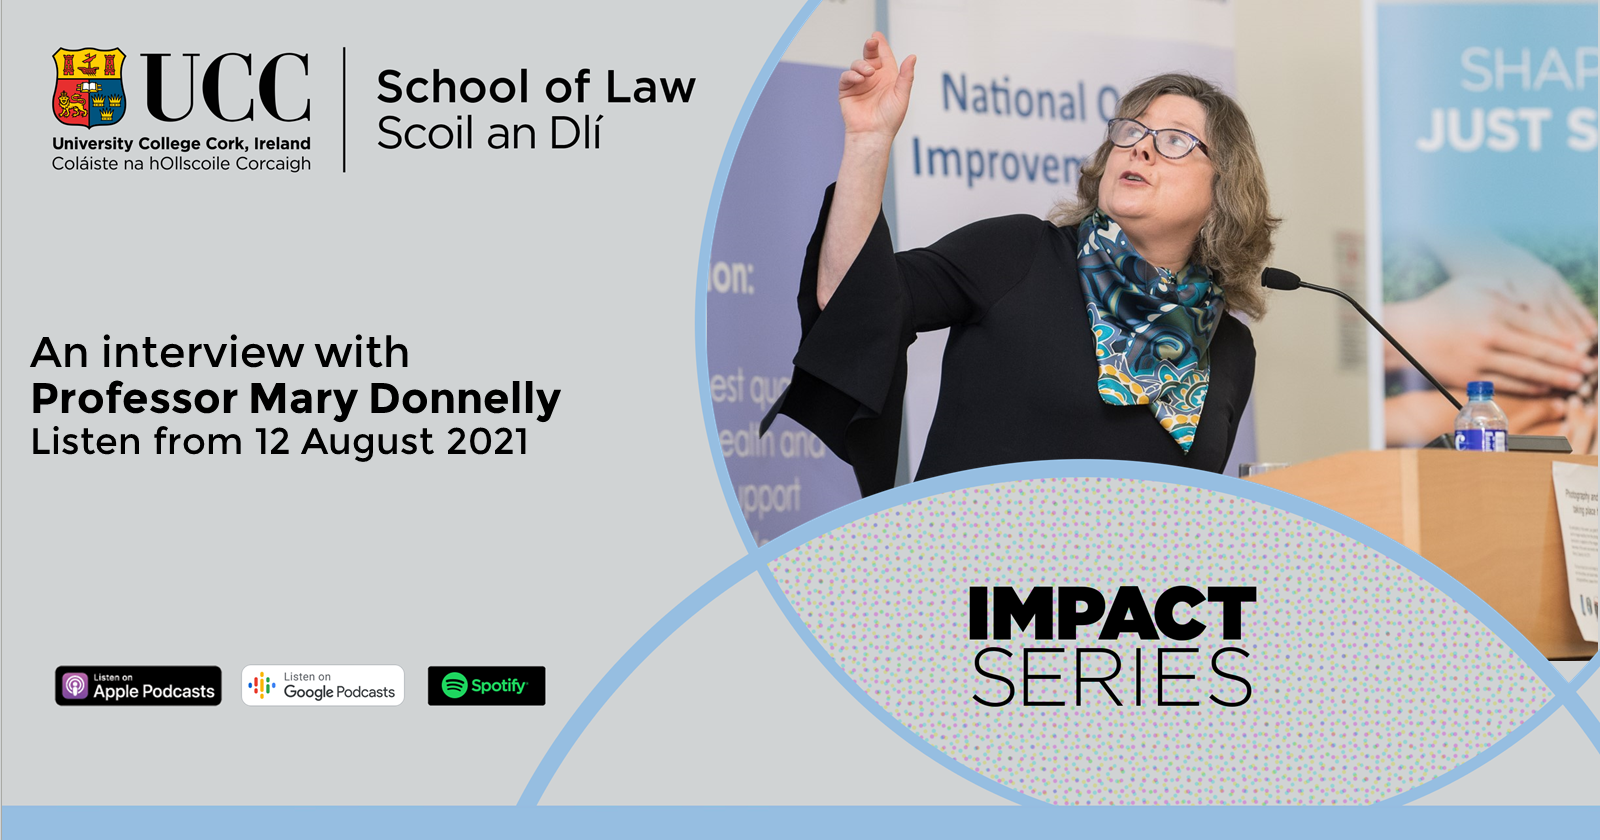 Professor Mary Donnelly discusses health and capacity law, consent issues and research ethics in the latest episode of UCC School of Law’s Impact Series